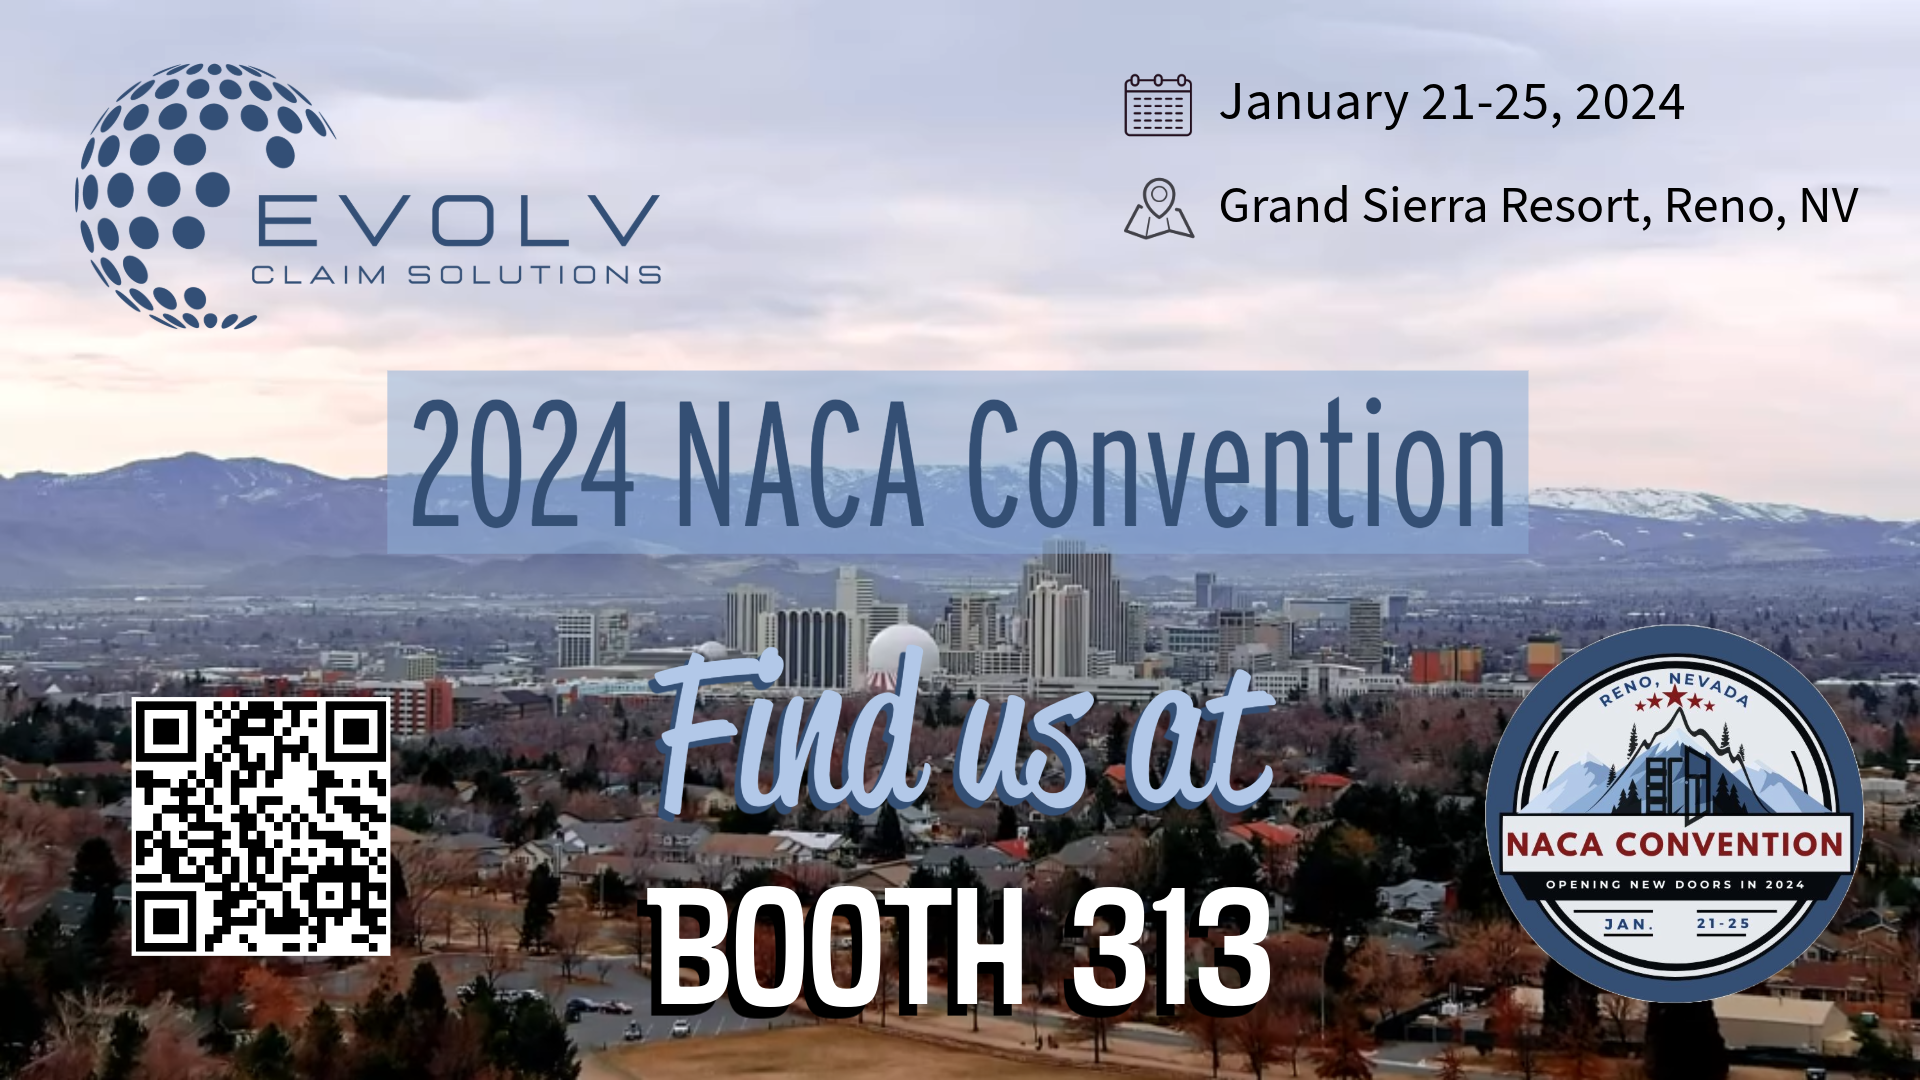 Evolv Claim Solutions will be at NACA 2024